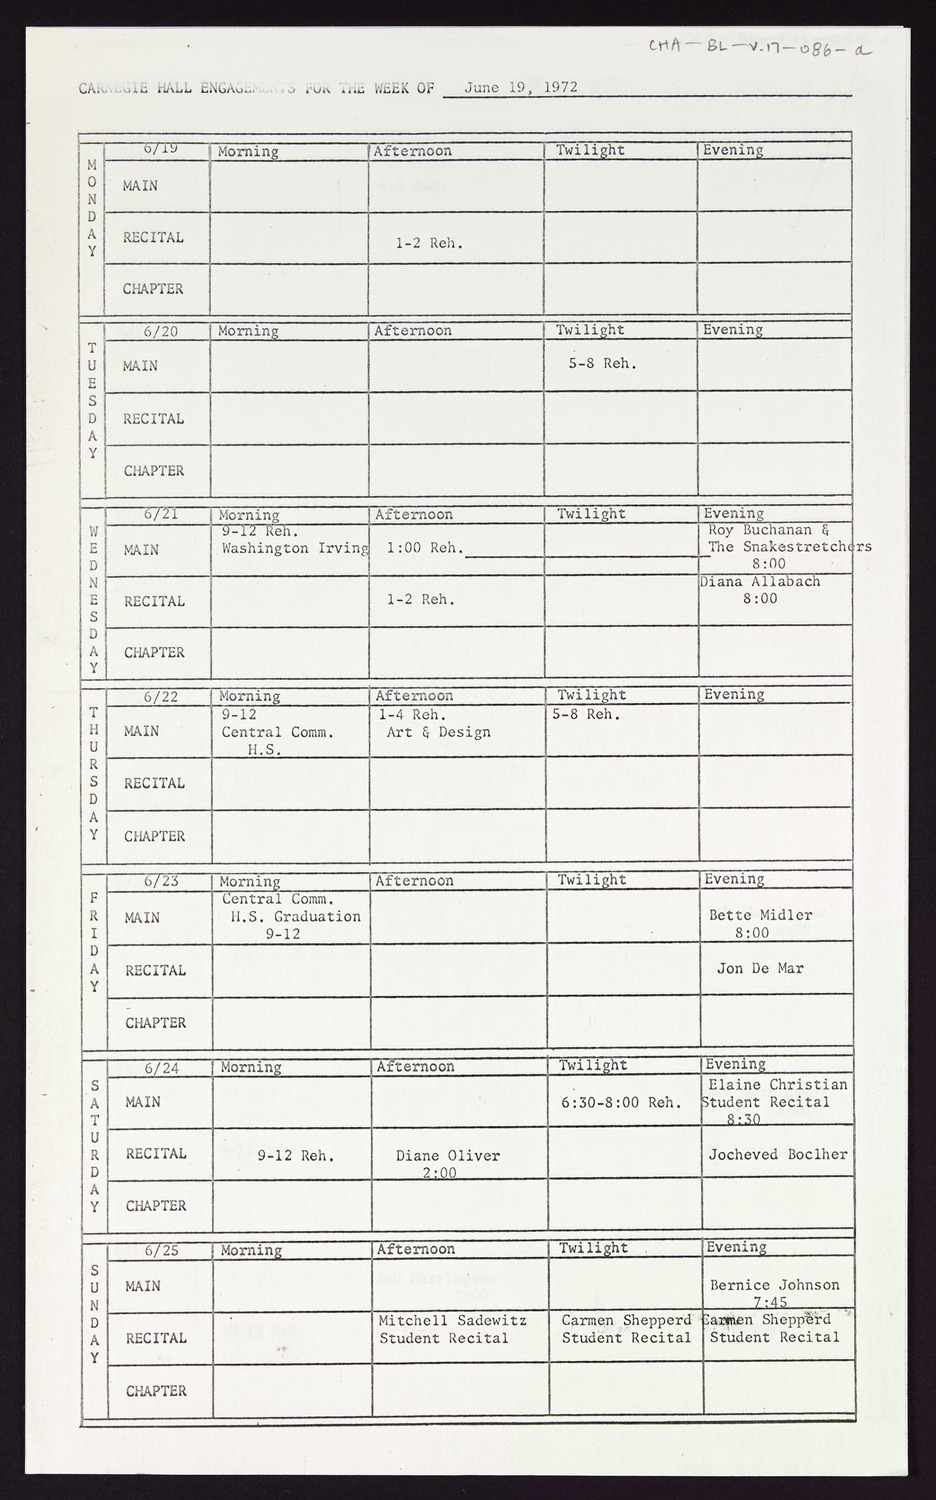 Carnegie Hall Booking Ledger, volume 17, page 86a